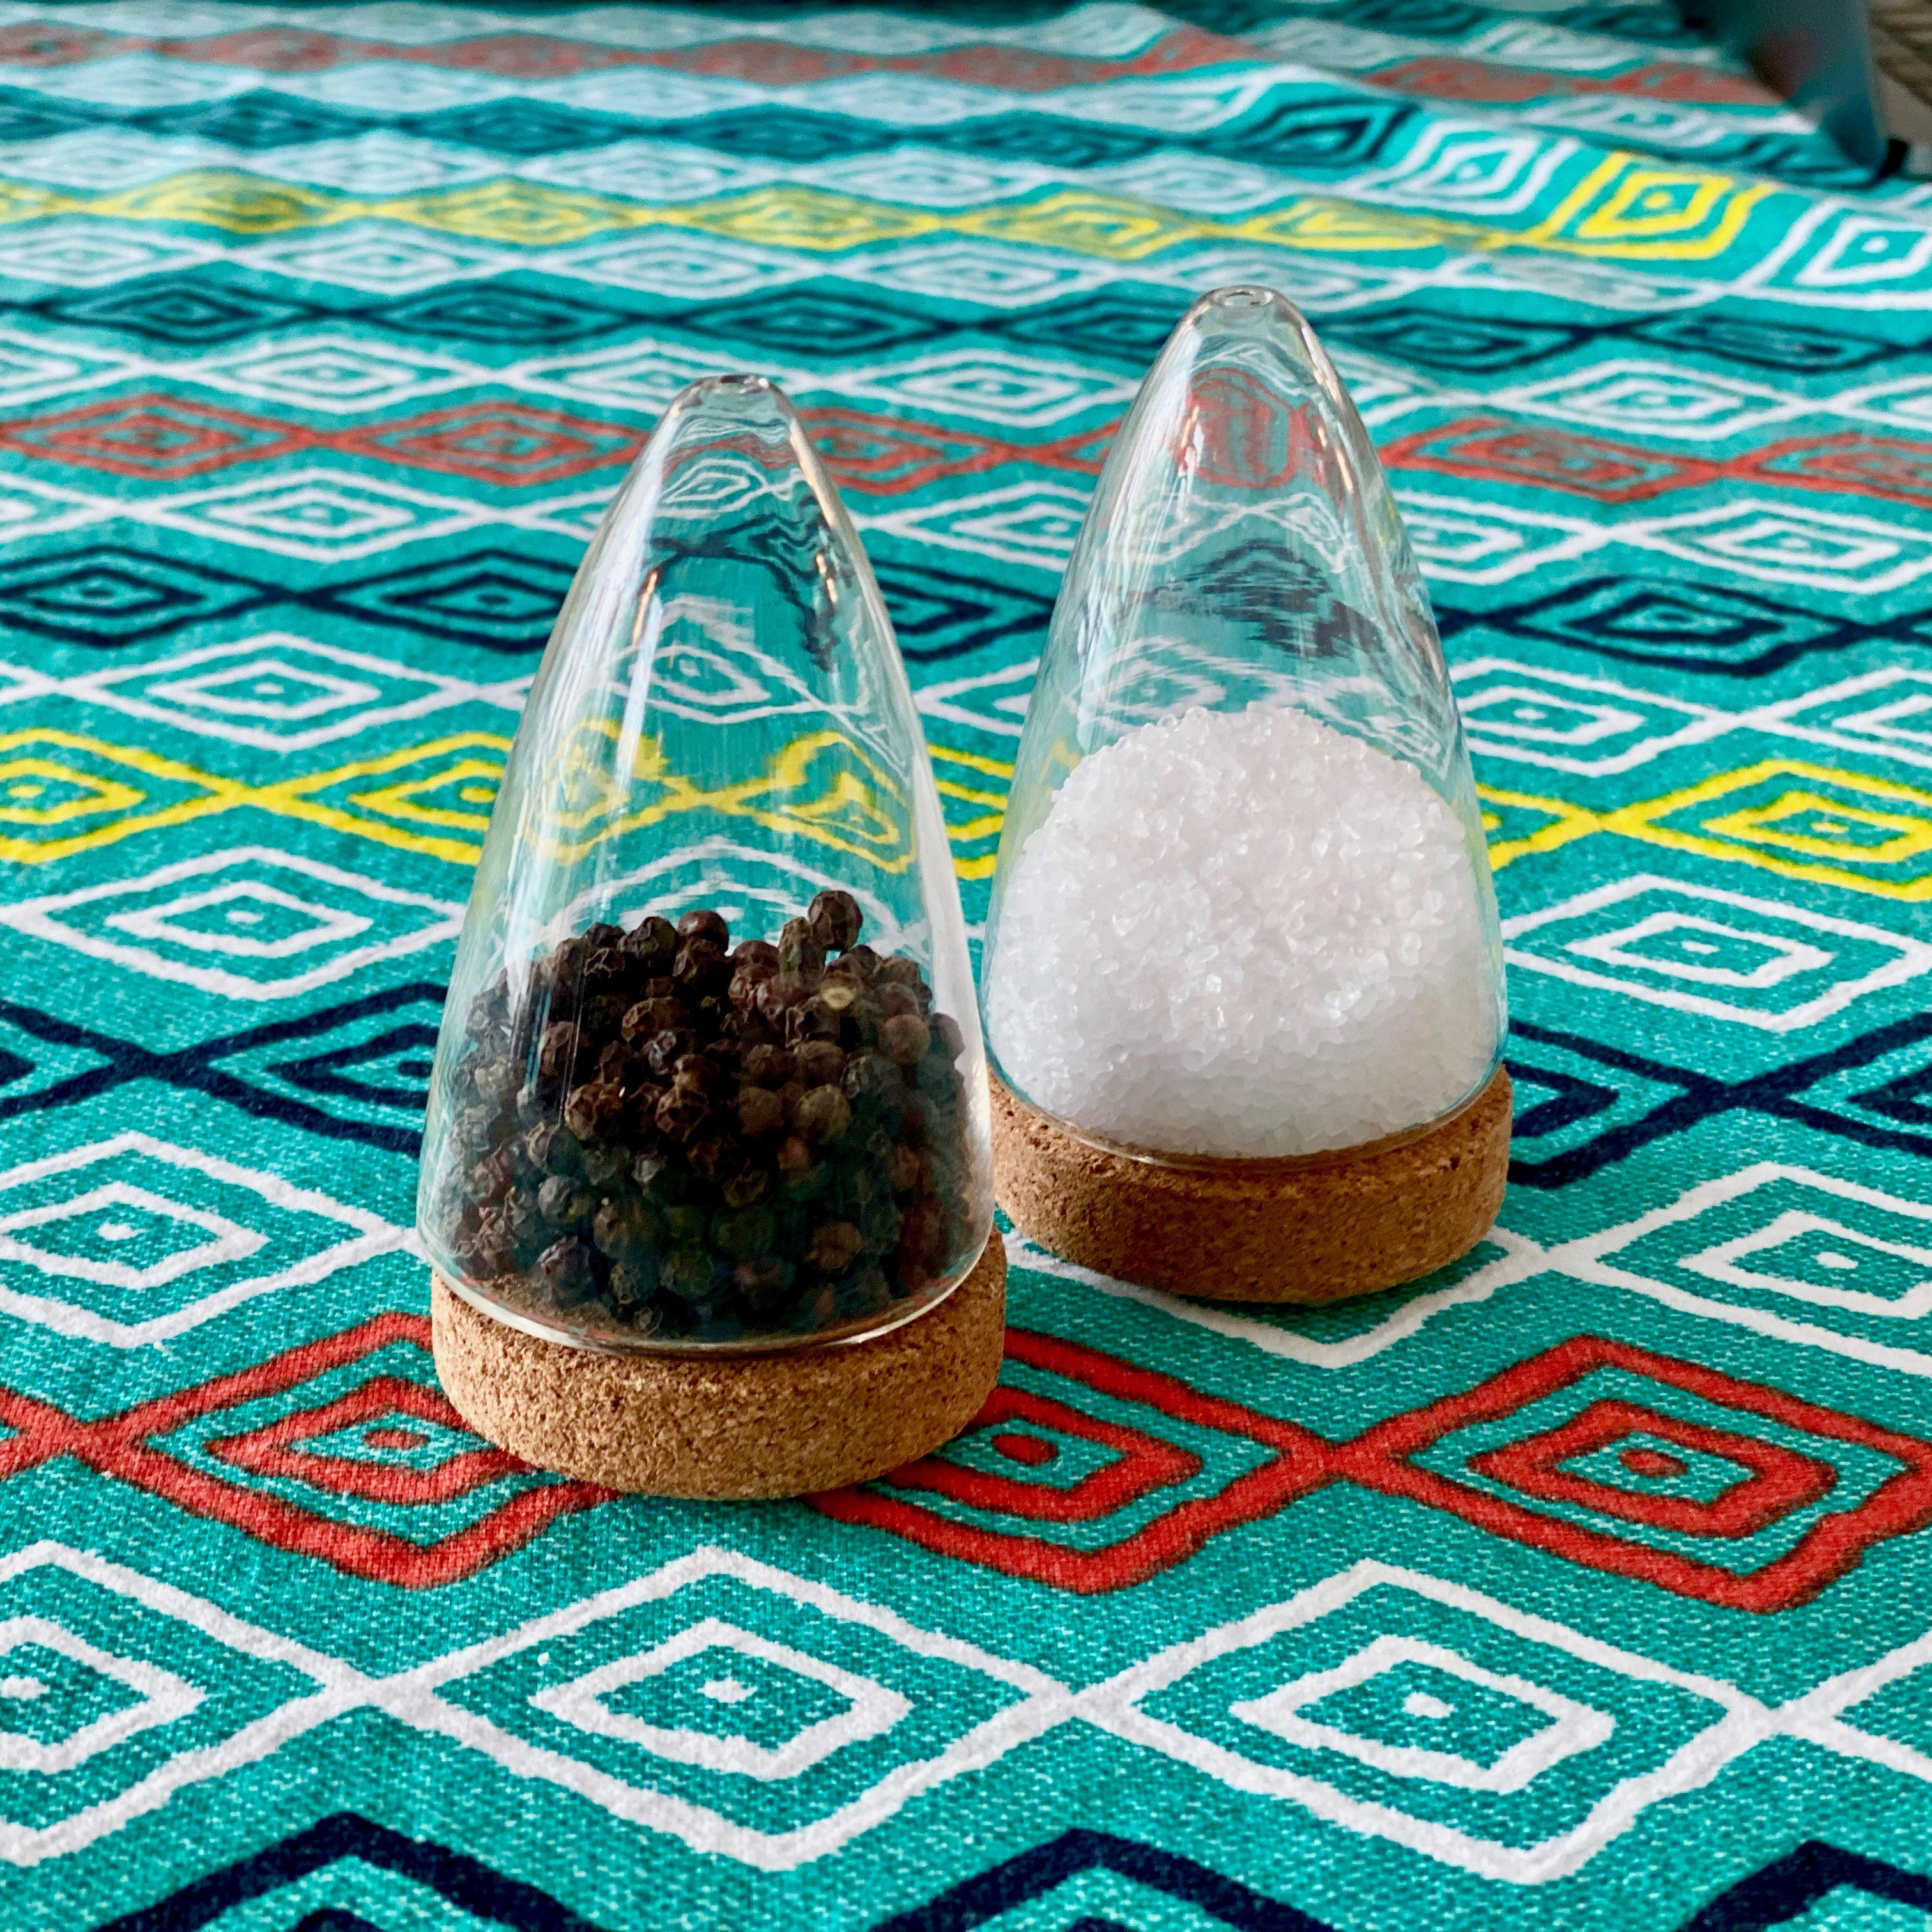 Ditch the dull! BOEIEN shakers by PuiK turn seasoning into an art form. Mouth-blown glass meets playful cork in this unique set. Tilt-worthy design & chic style. Elevate your kitchen & impress guests. Shop now!